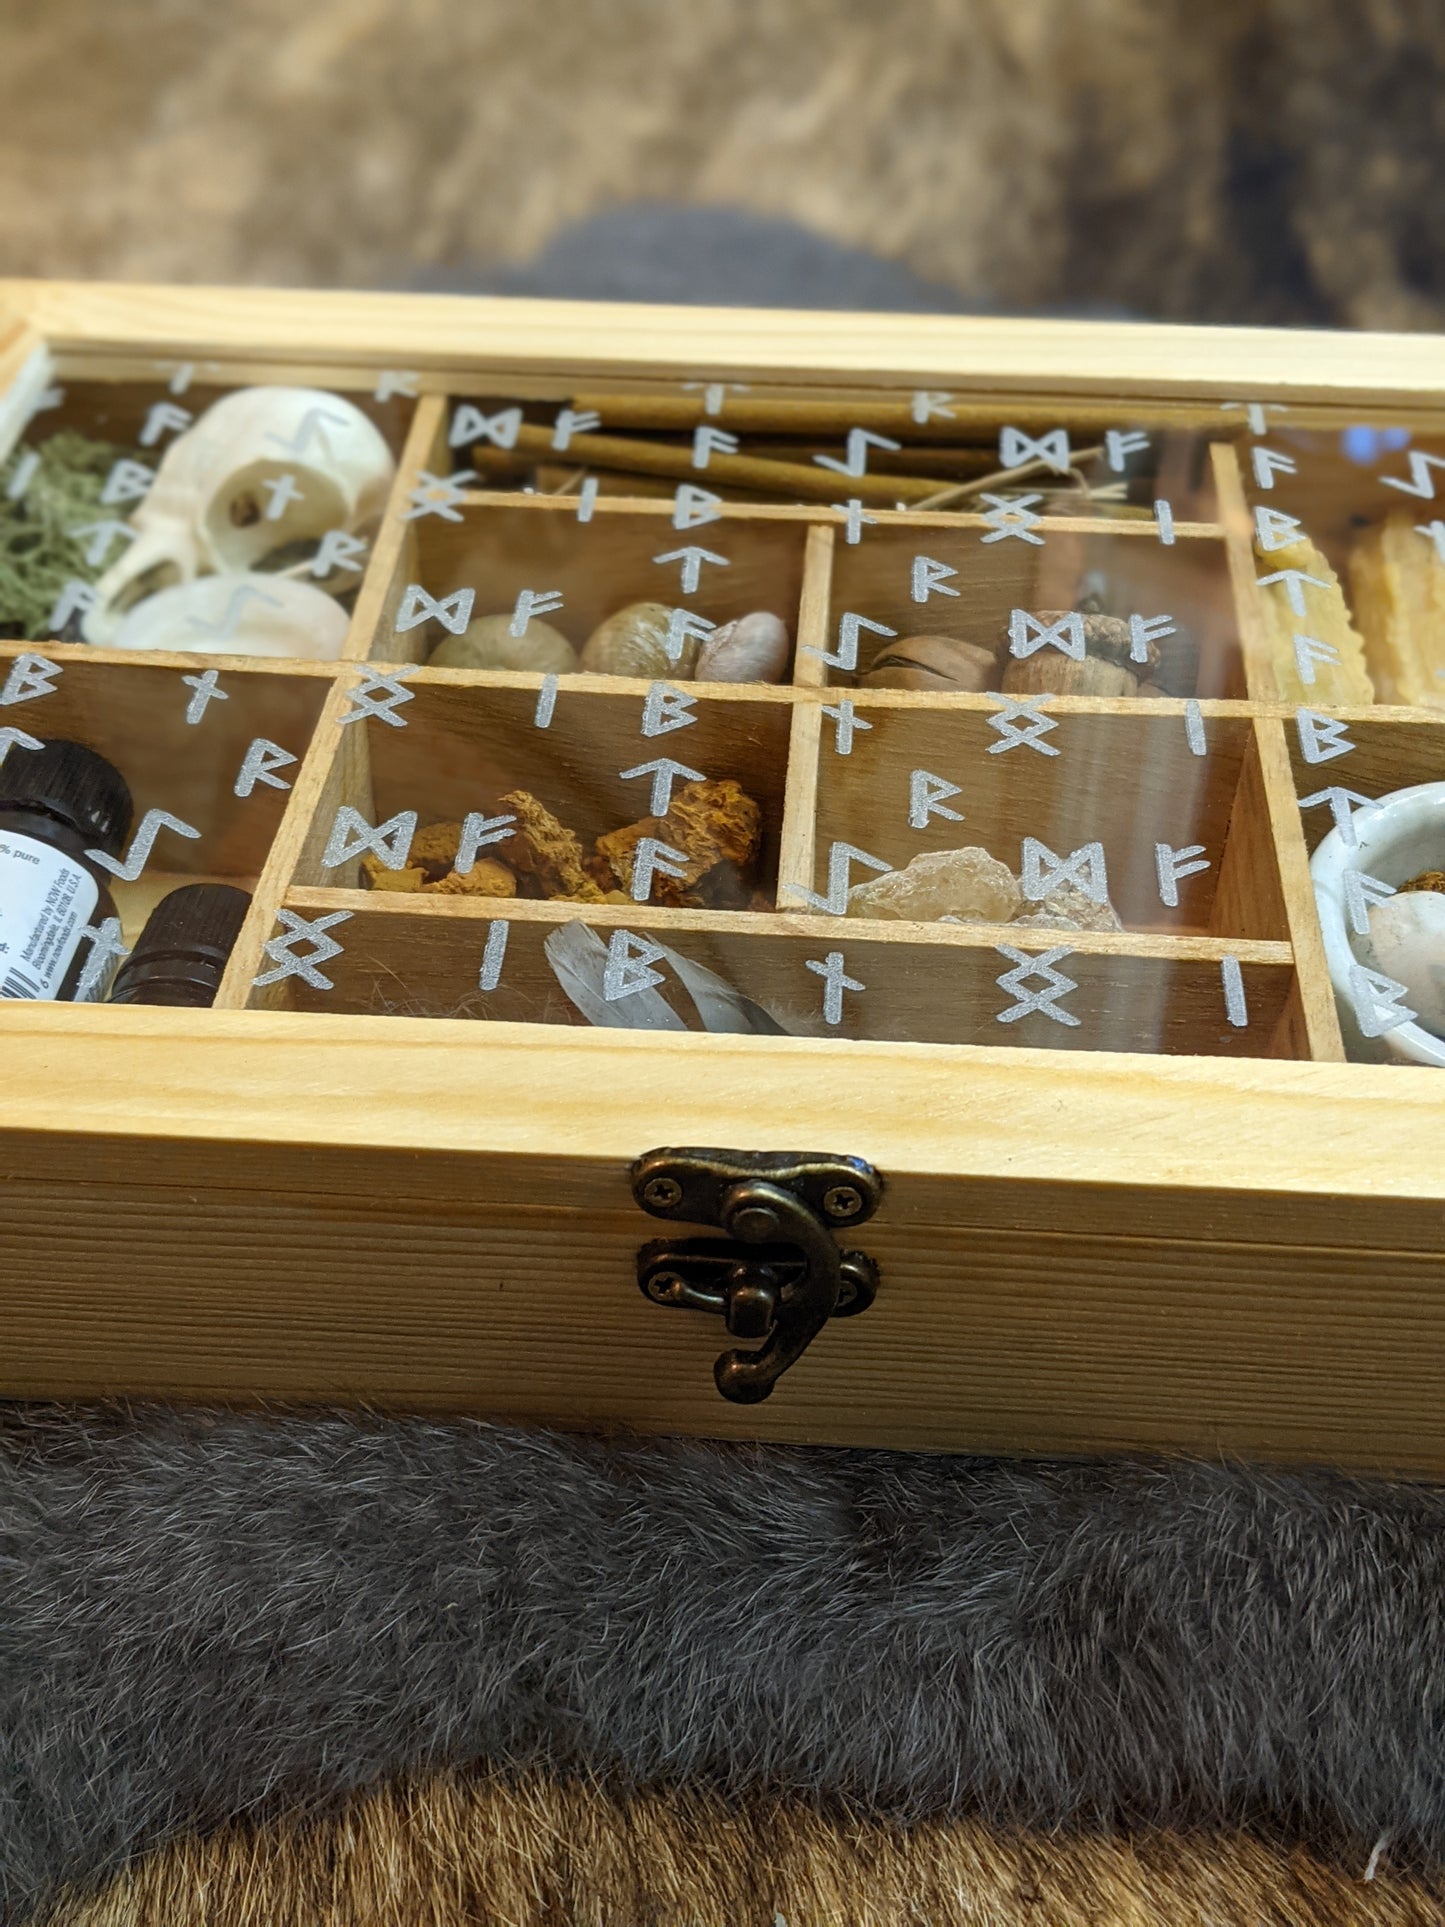 Large Engraved Altar Box Witch Box Norse Pagan Rune Box For Essential Oils, Rocks, Crystals, Personal Finds Asatru Gift Compartments